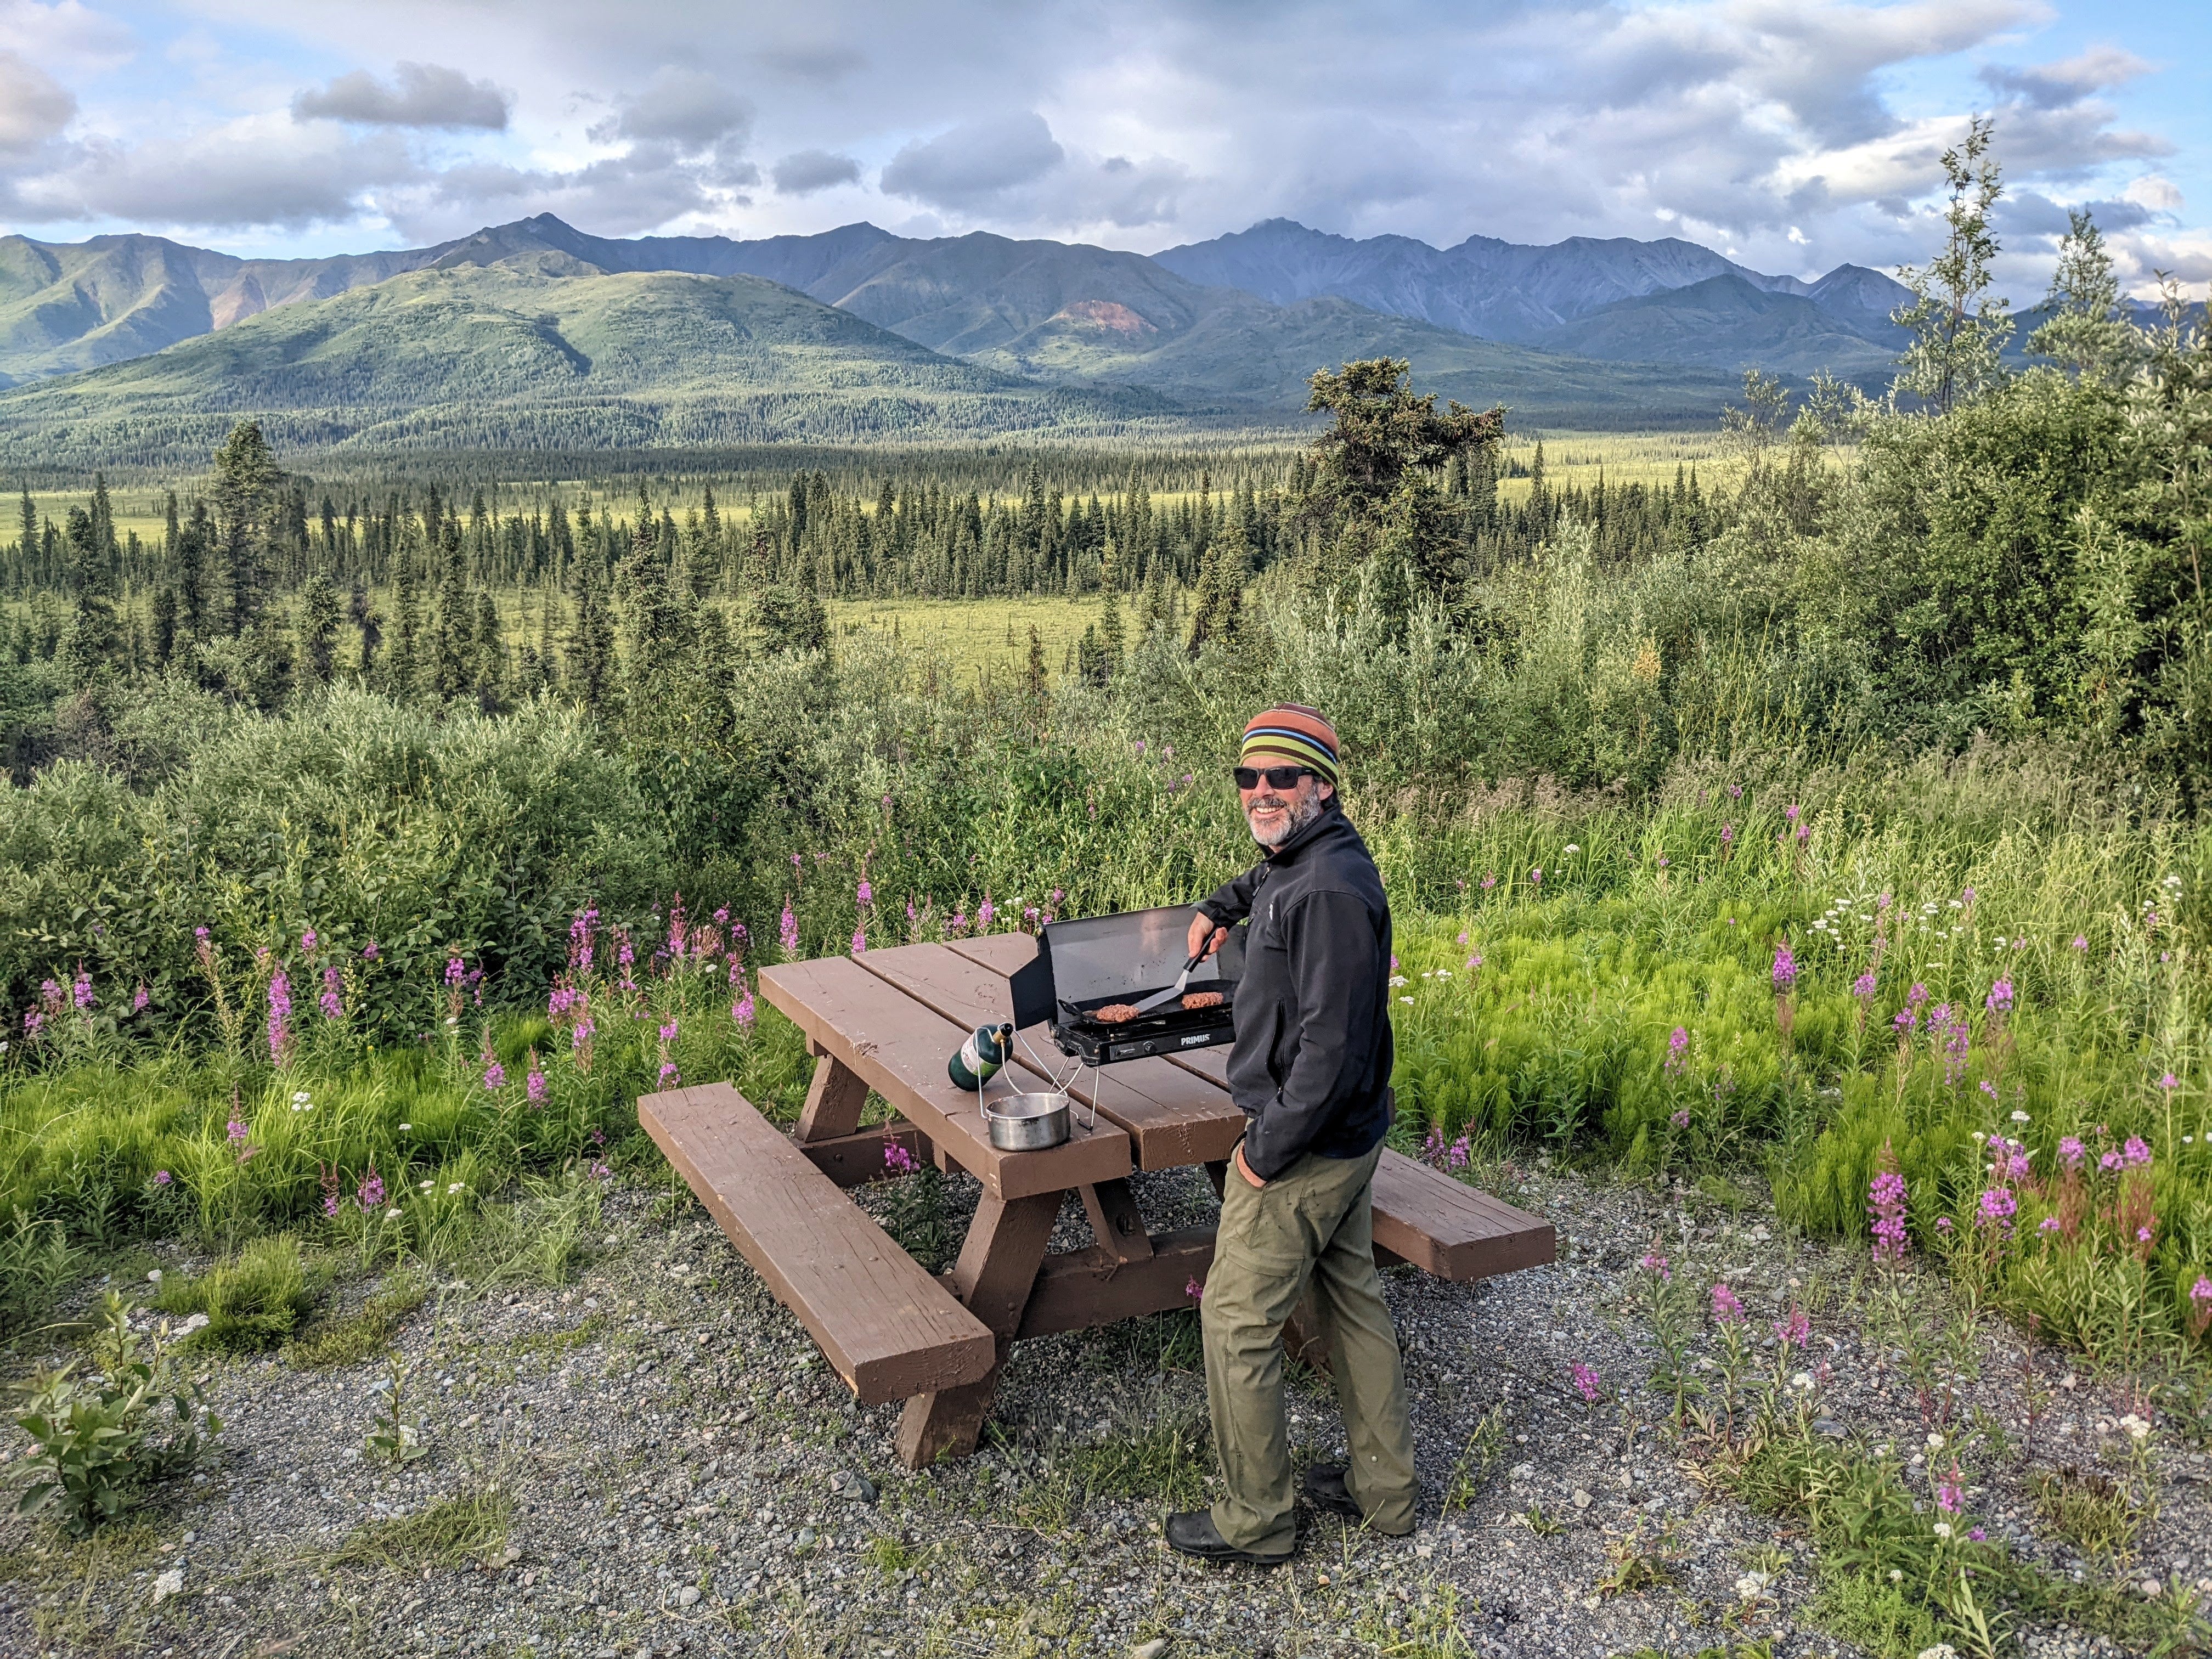 Camper submitted image from Nabesna Road Wrangell St. Elias National Park - 3